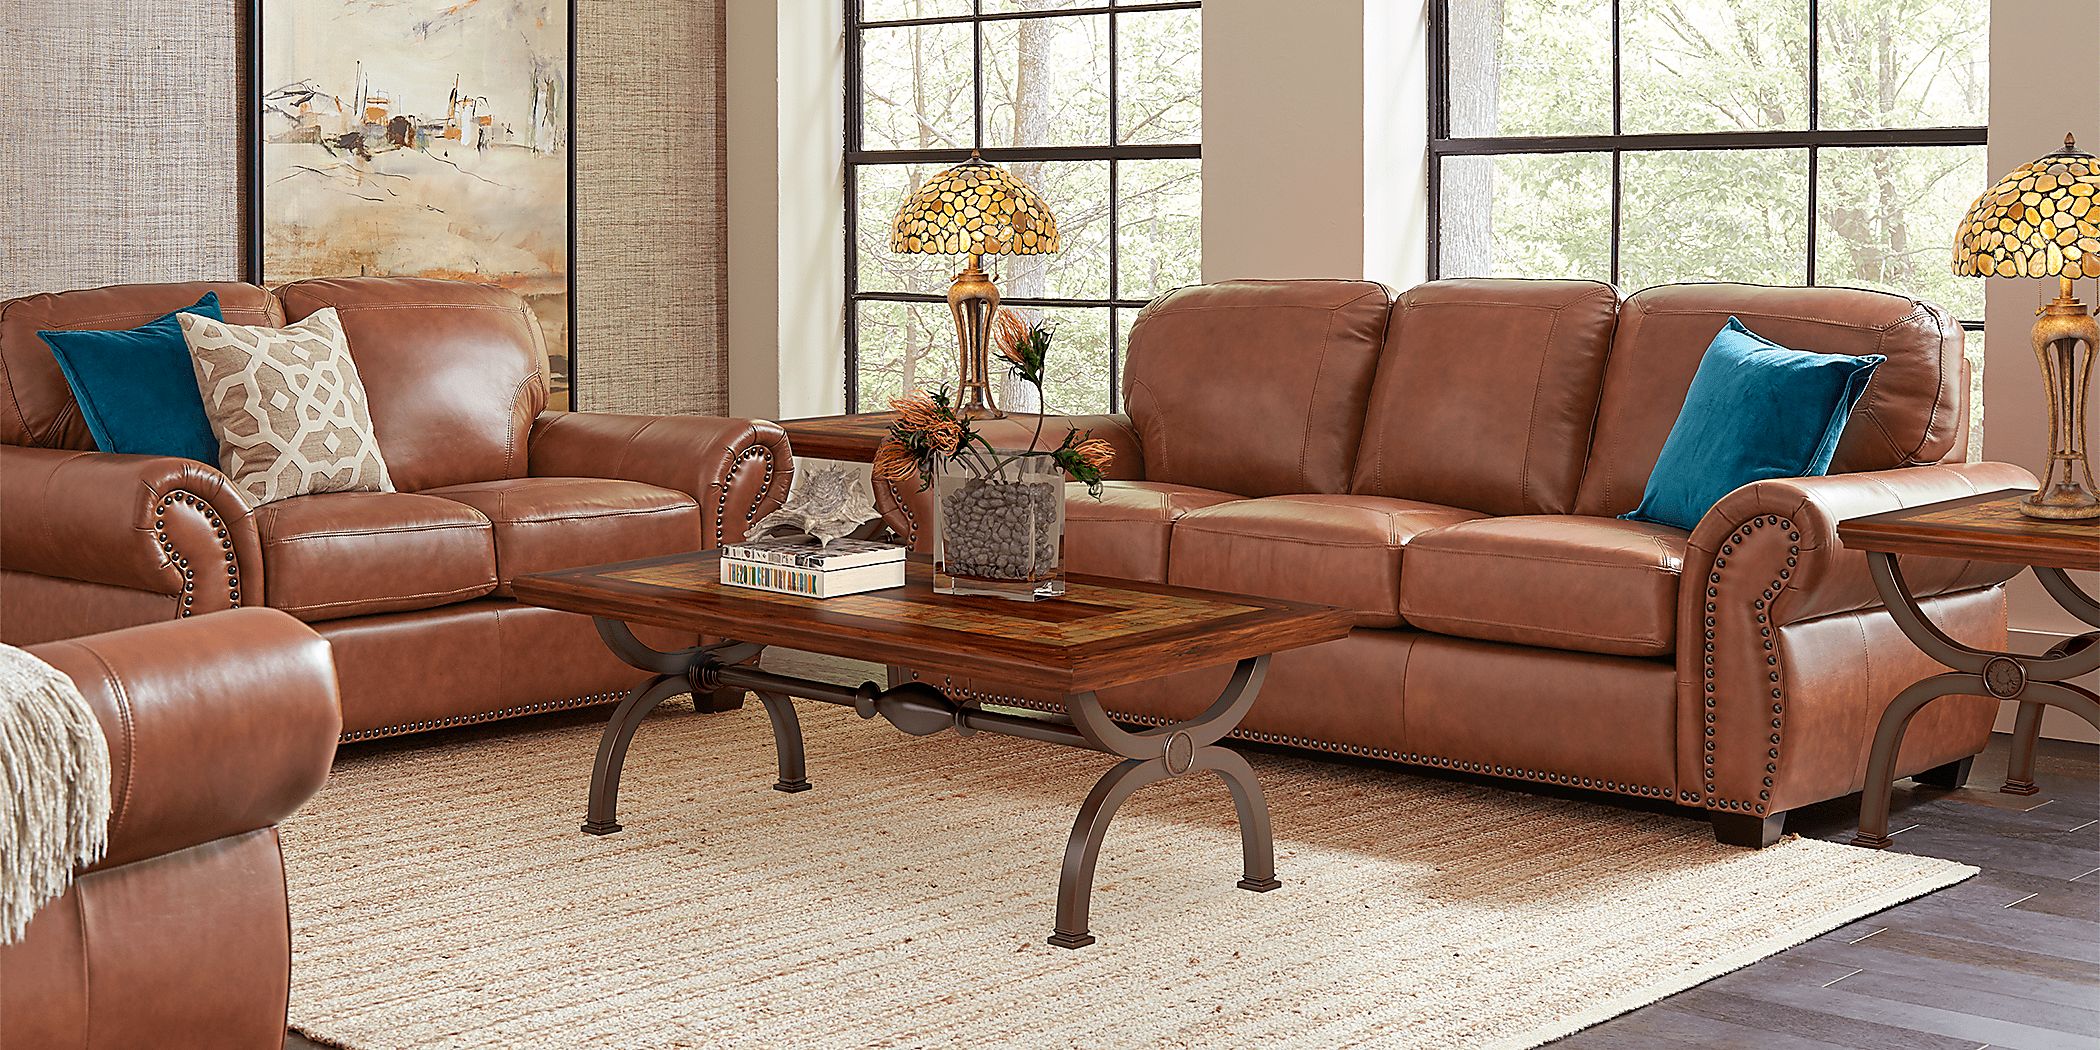 Balencia Light Brown Leather 5 Pc Living Room